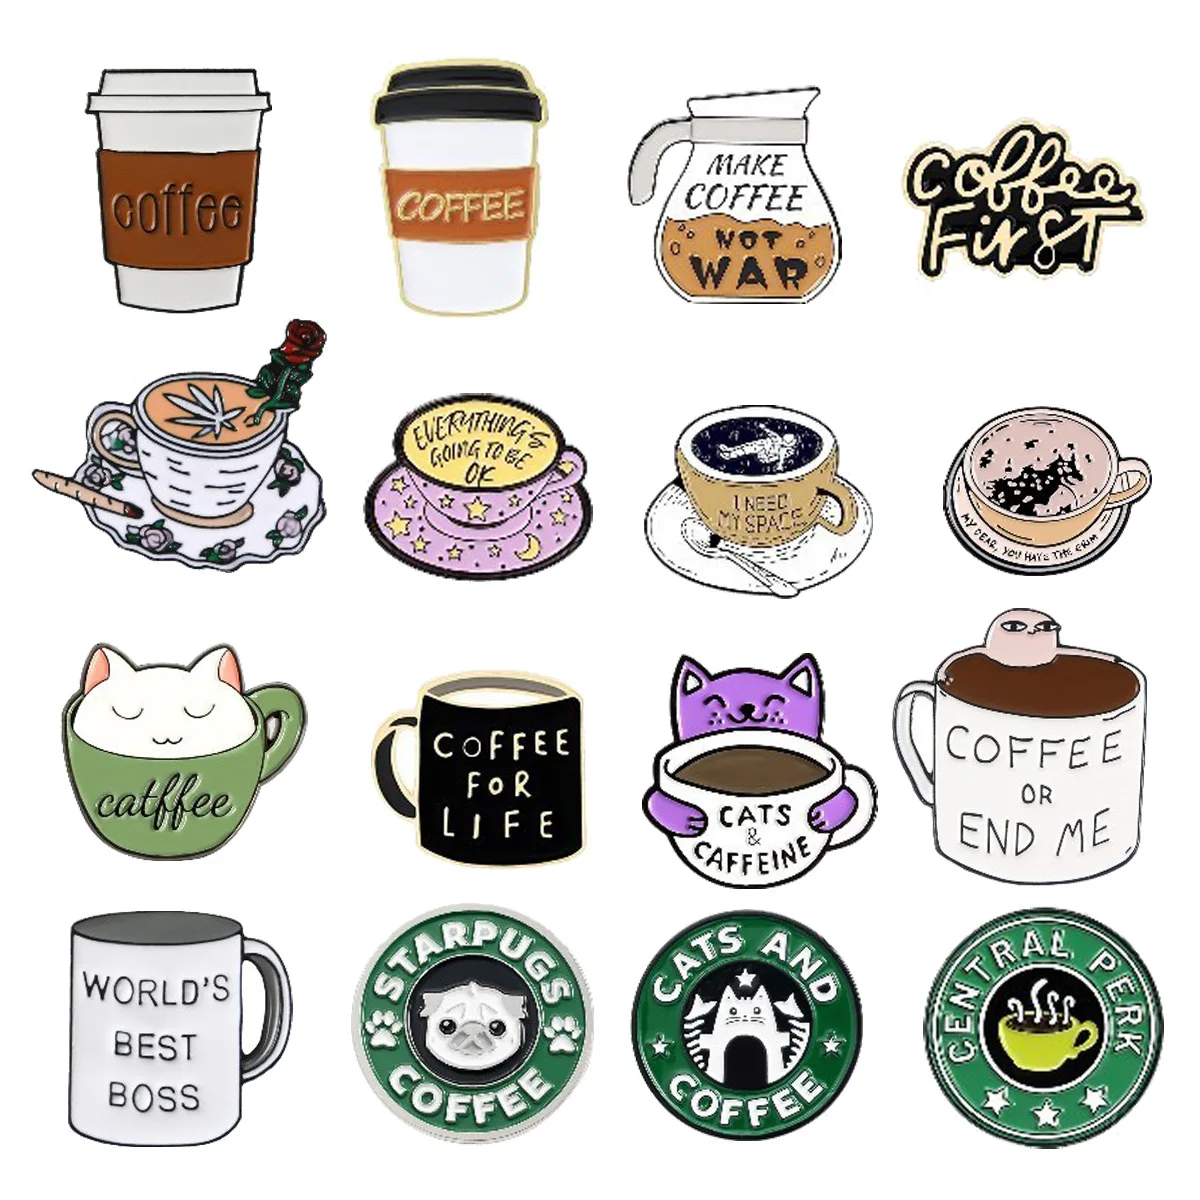 https://ae01.alicdn.com/kf/S4862aa34b4054a43805bc5966855af37J/Coffee-Enamel-Pins-Custom-Astronaut-Cup-Dog-and-Cat-Drink-Club-Brooches-Lapel-Badges-Cartoon-Jewelry.jpg